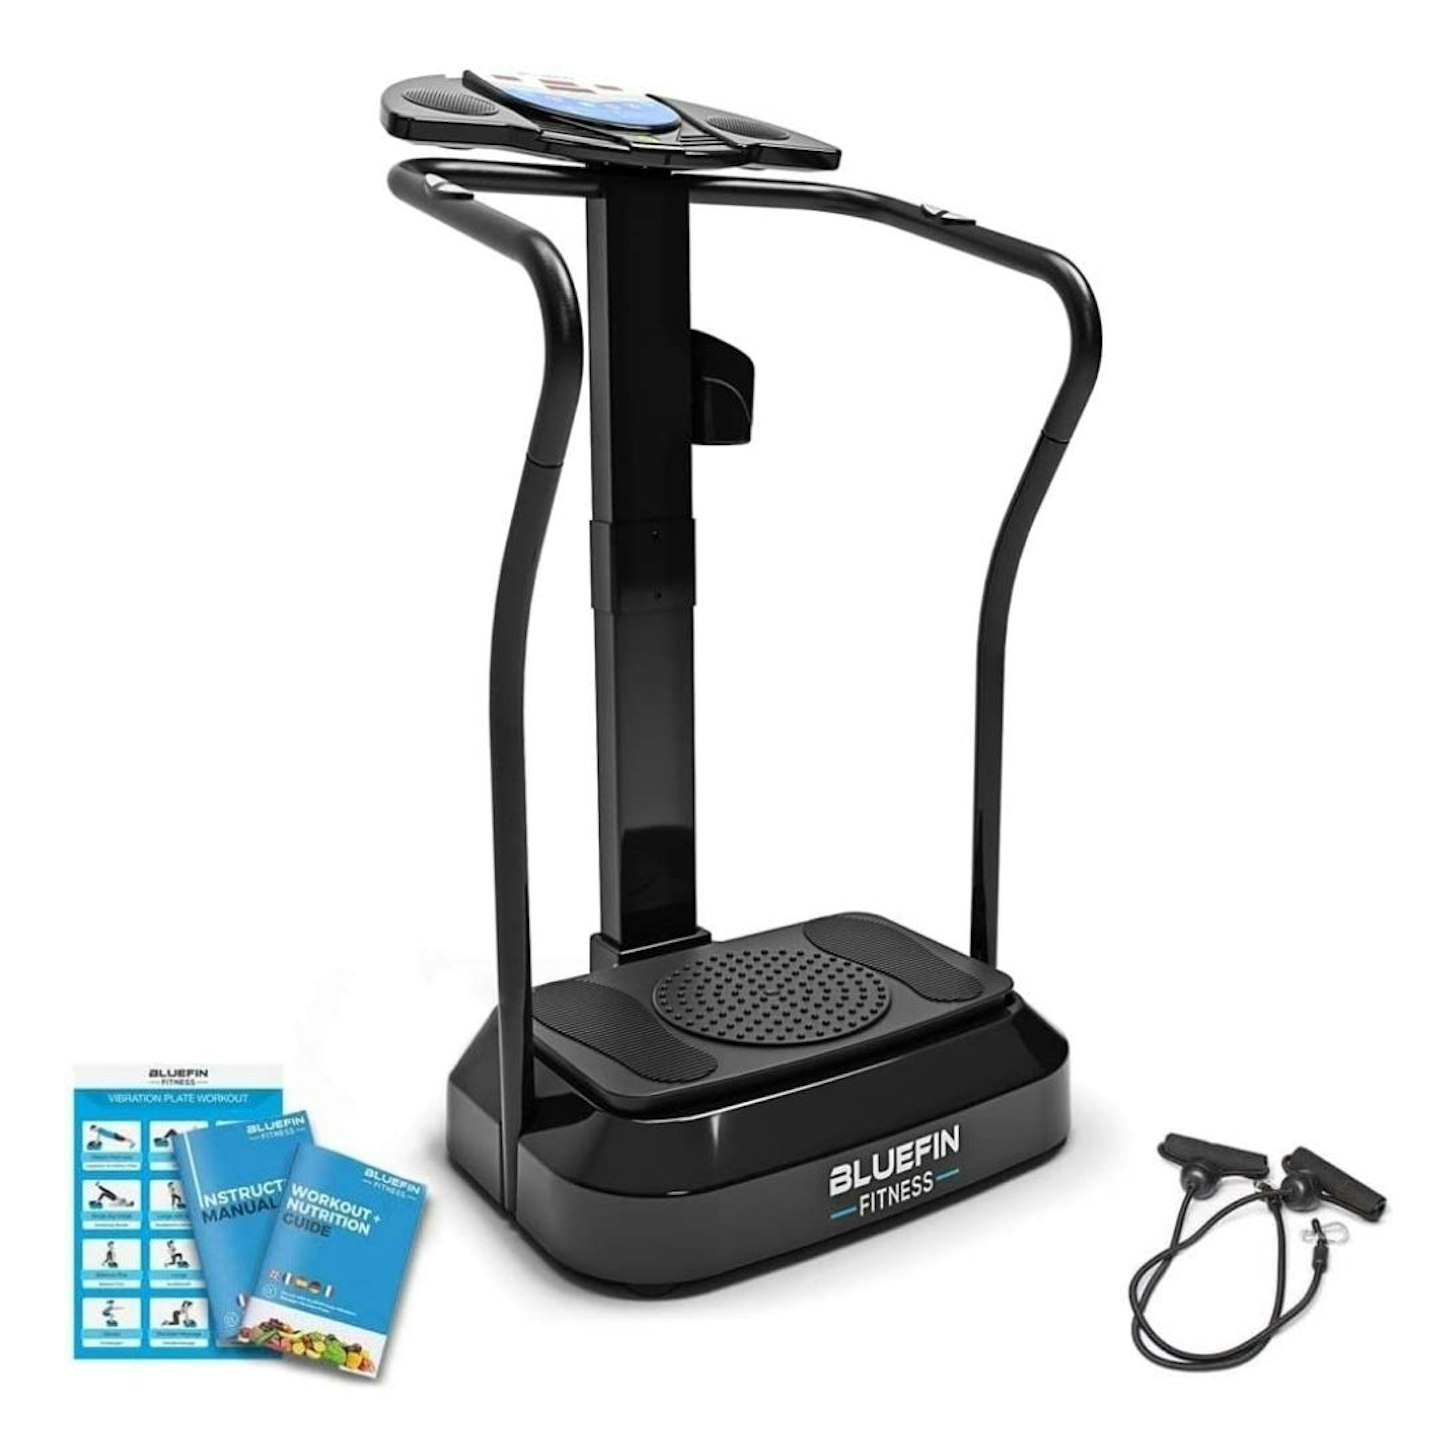 Best vibration plates to enhance your home workouts